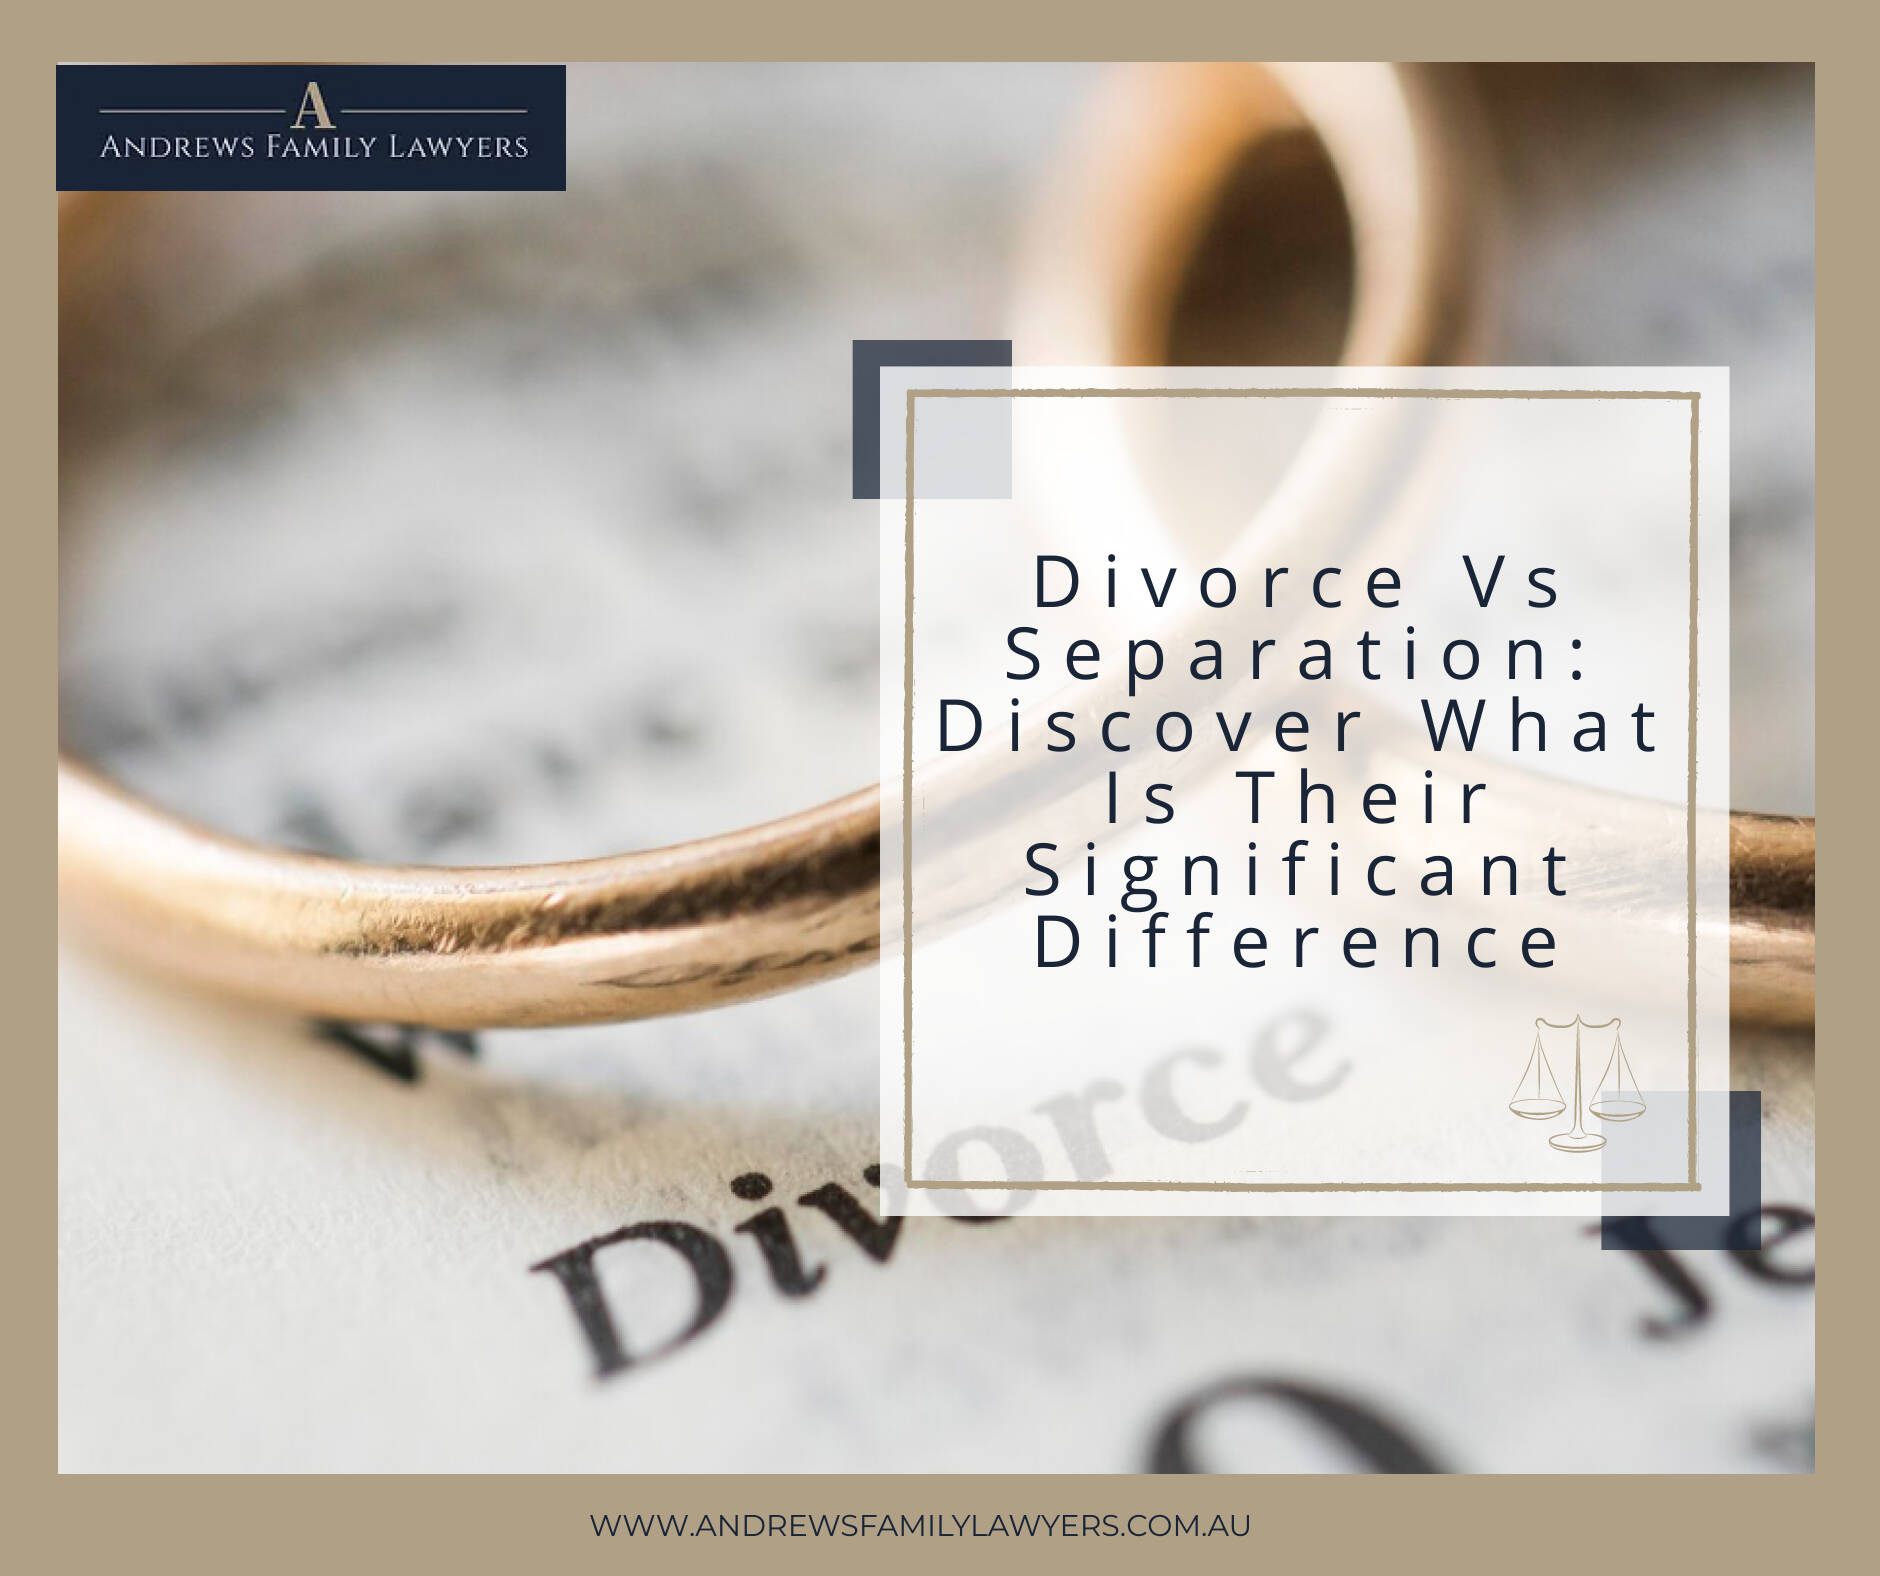 Divorce Vs Separation: Discover What Is Their Significant Difference